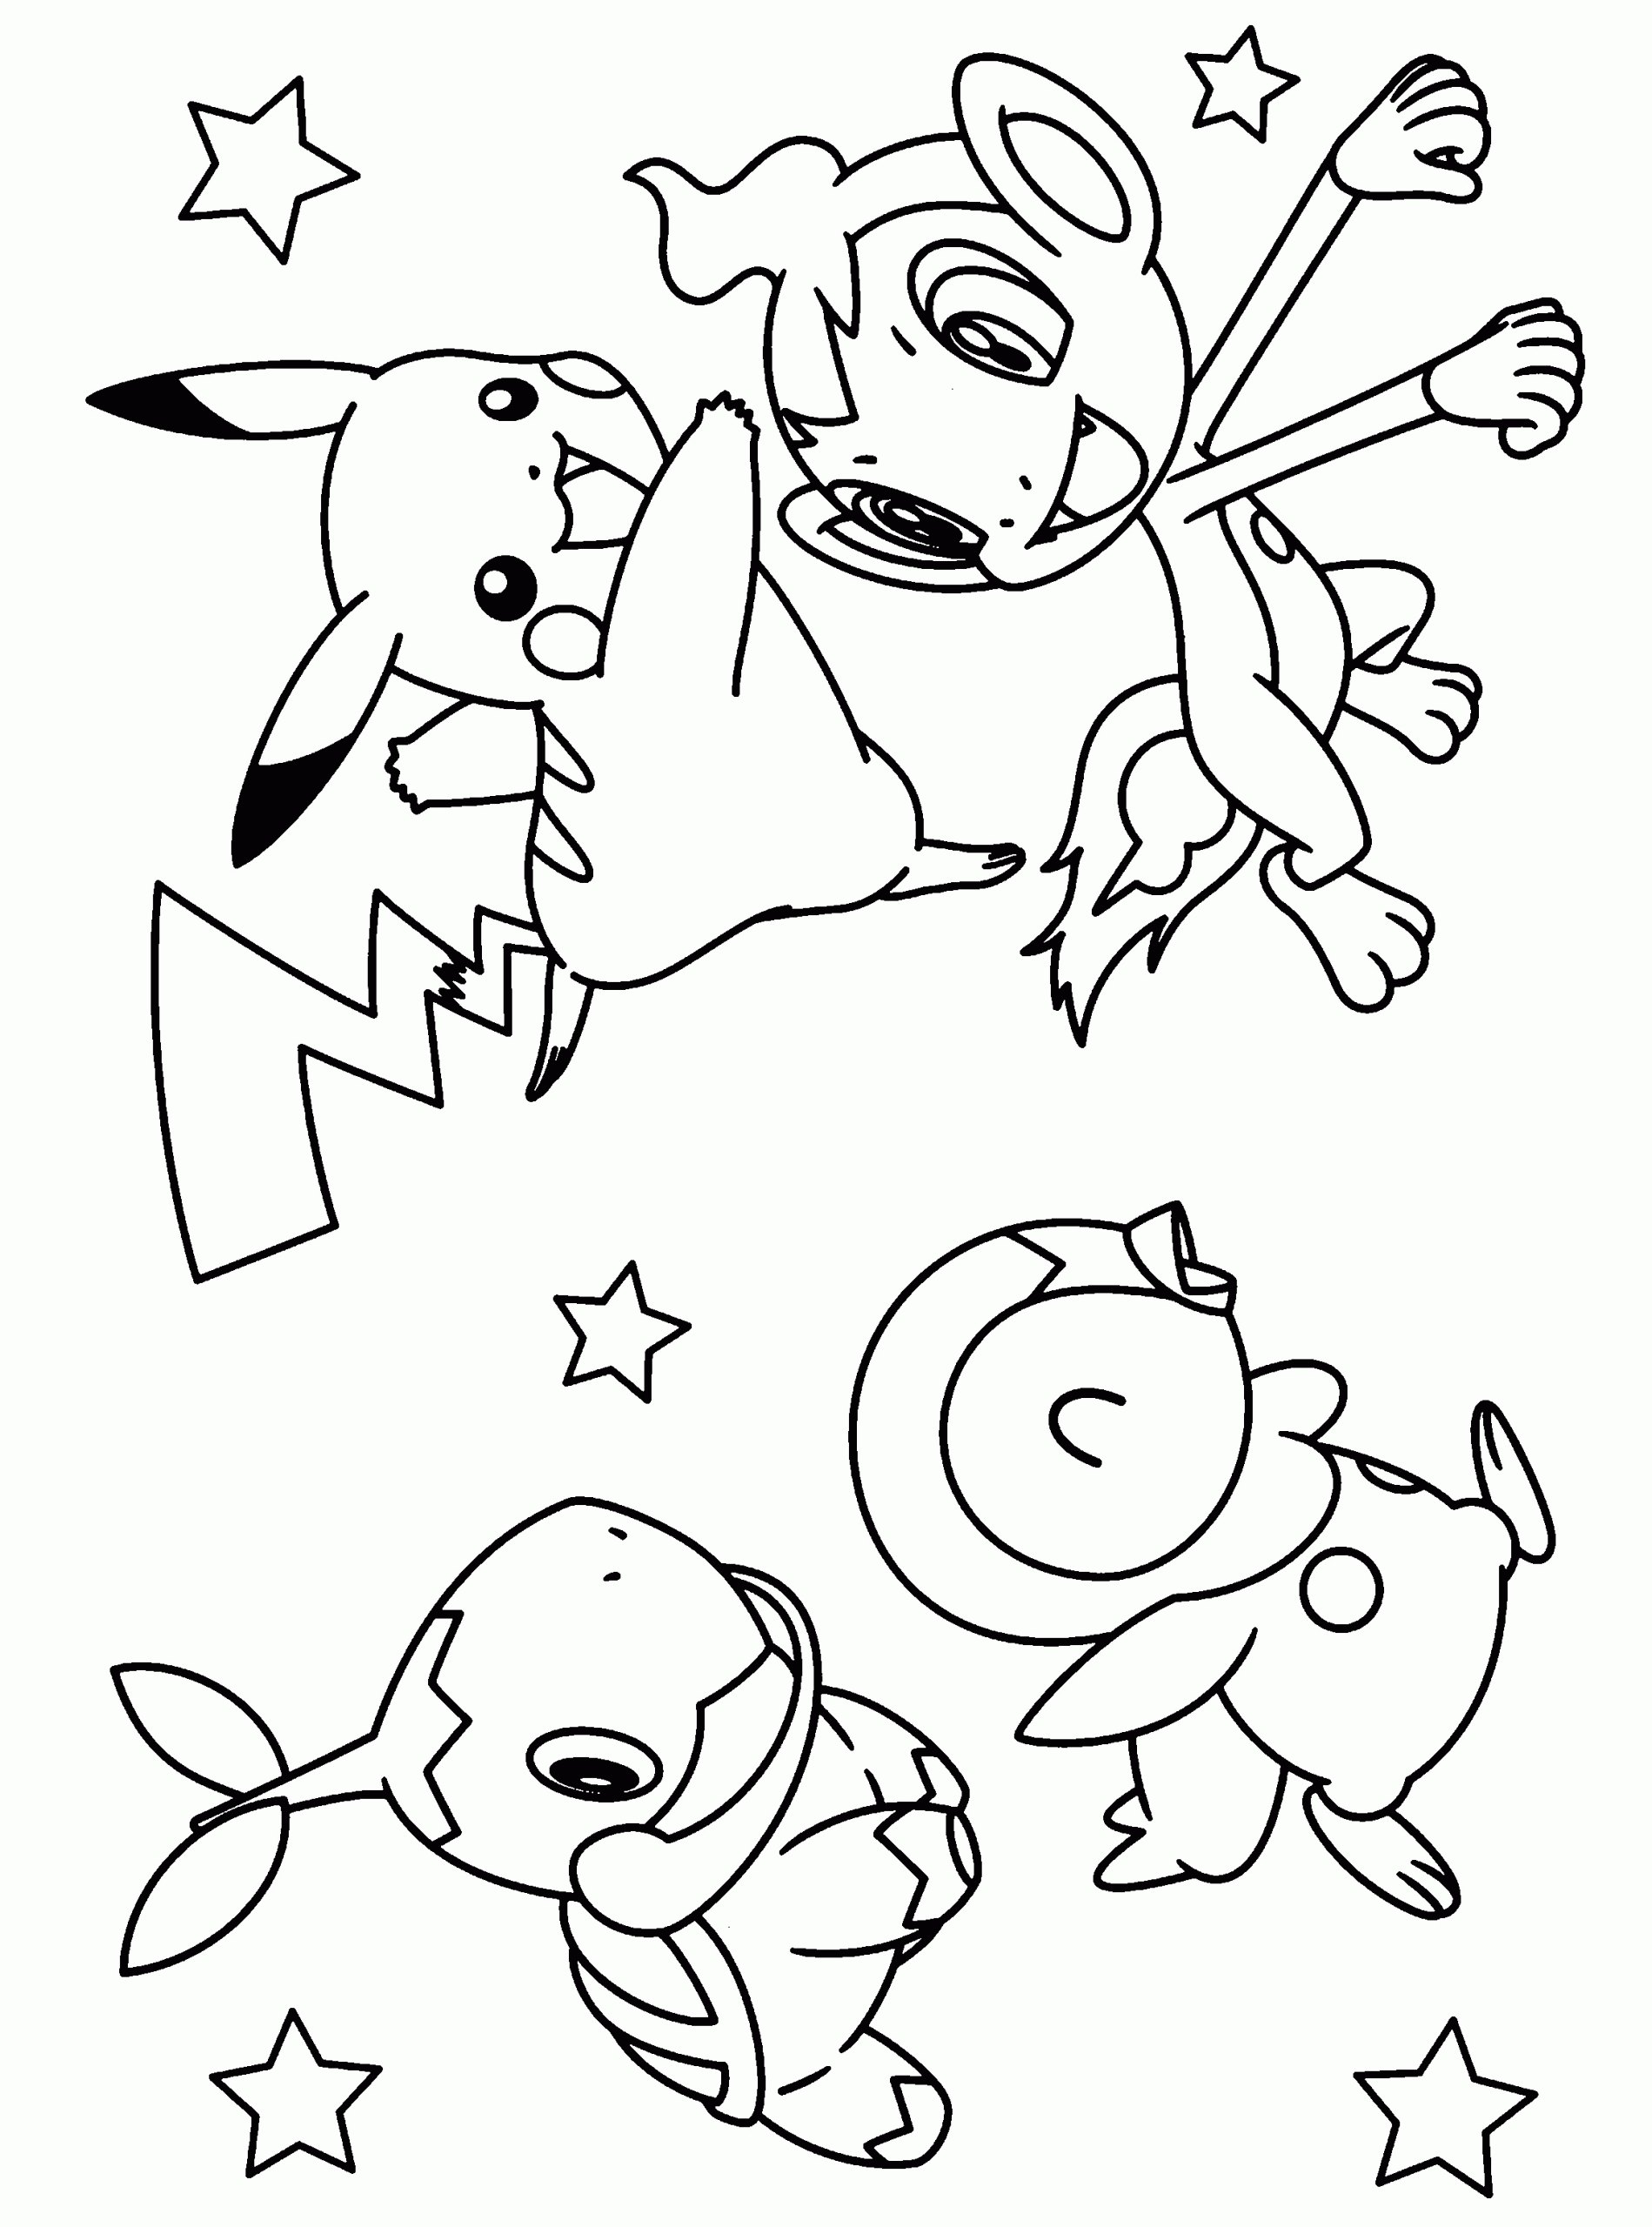 Pokemon Printable Coloring Pages
 55 Pokemon Coloring Pages For Kids